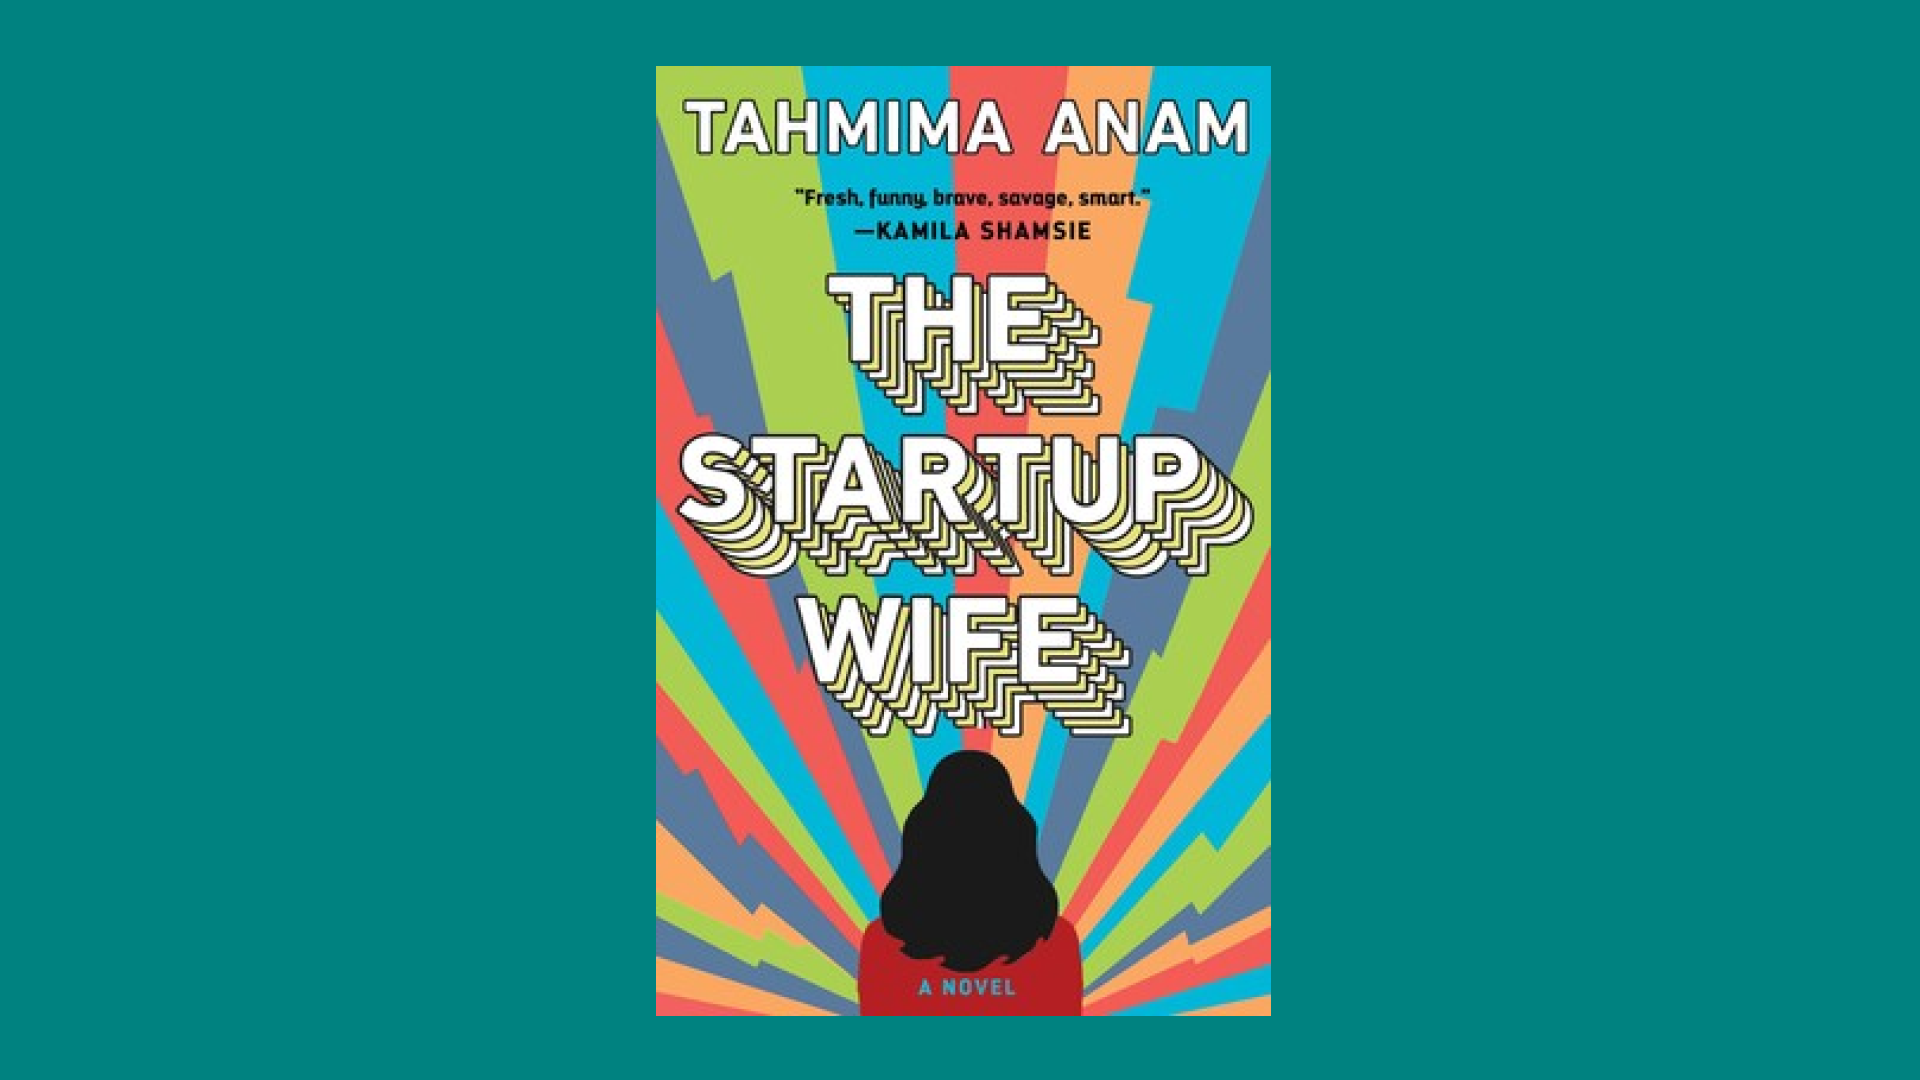 “The Startup Wife” by Tahmima Anam